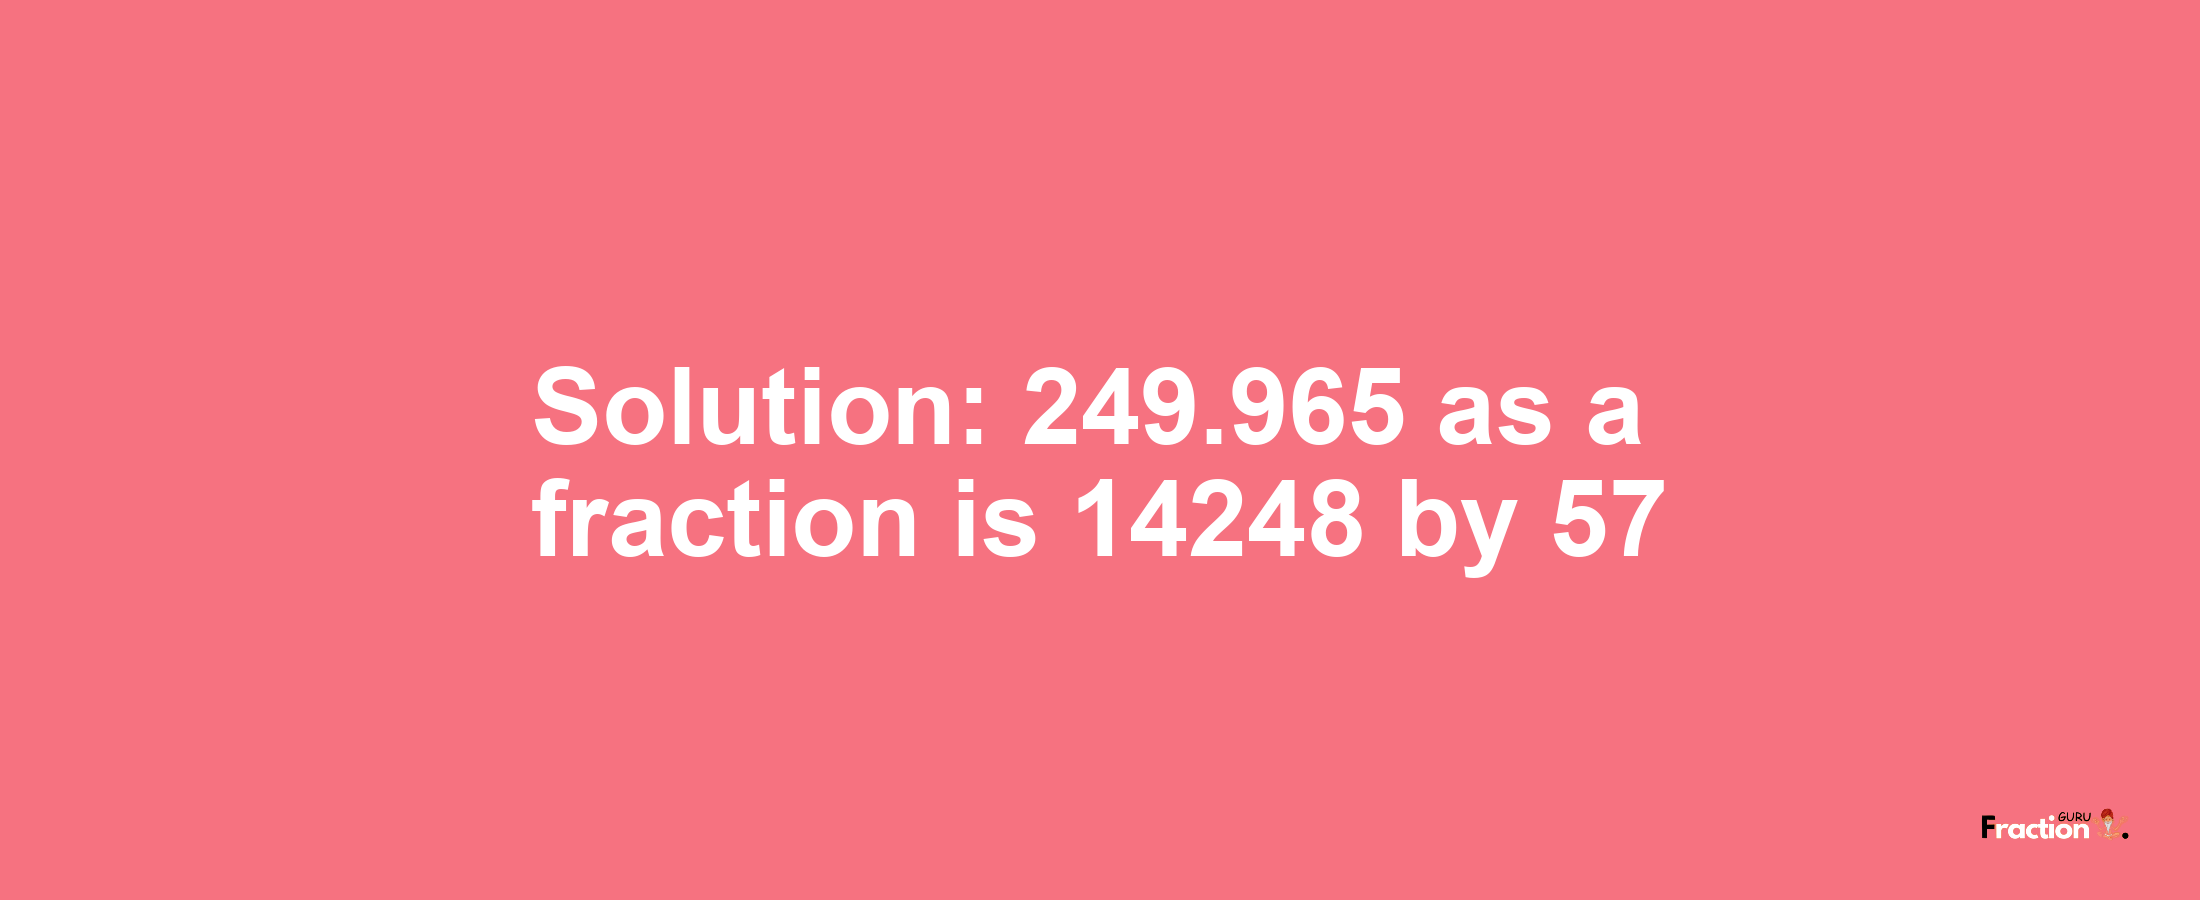 Solution:249.965 as a fraction is 14248/57